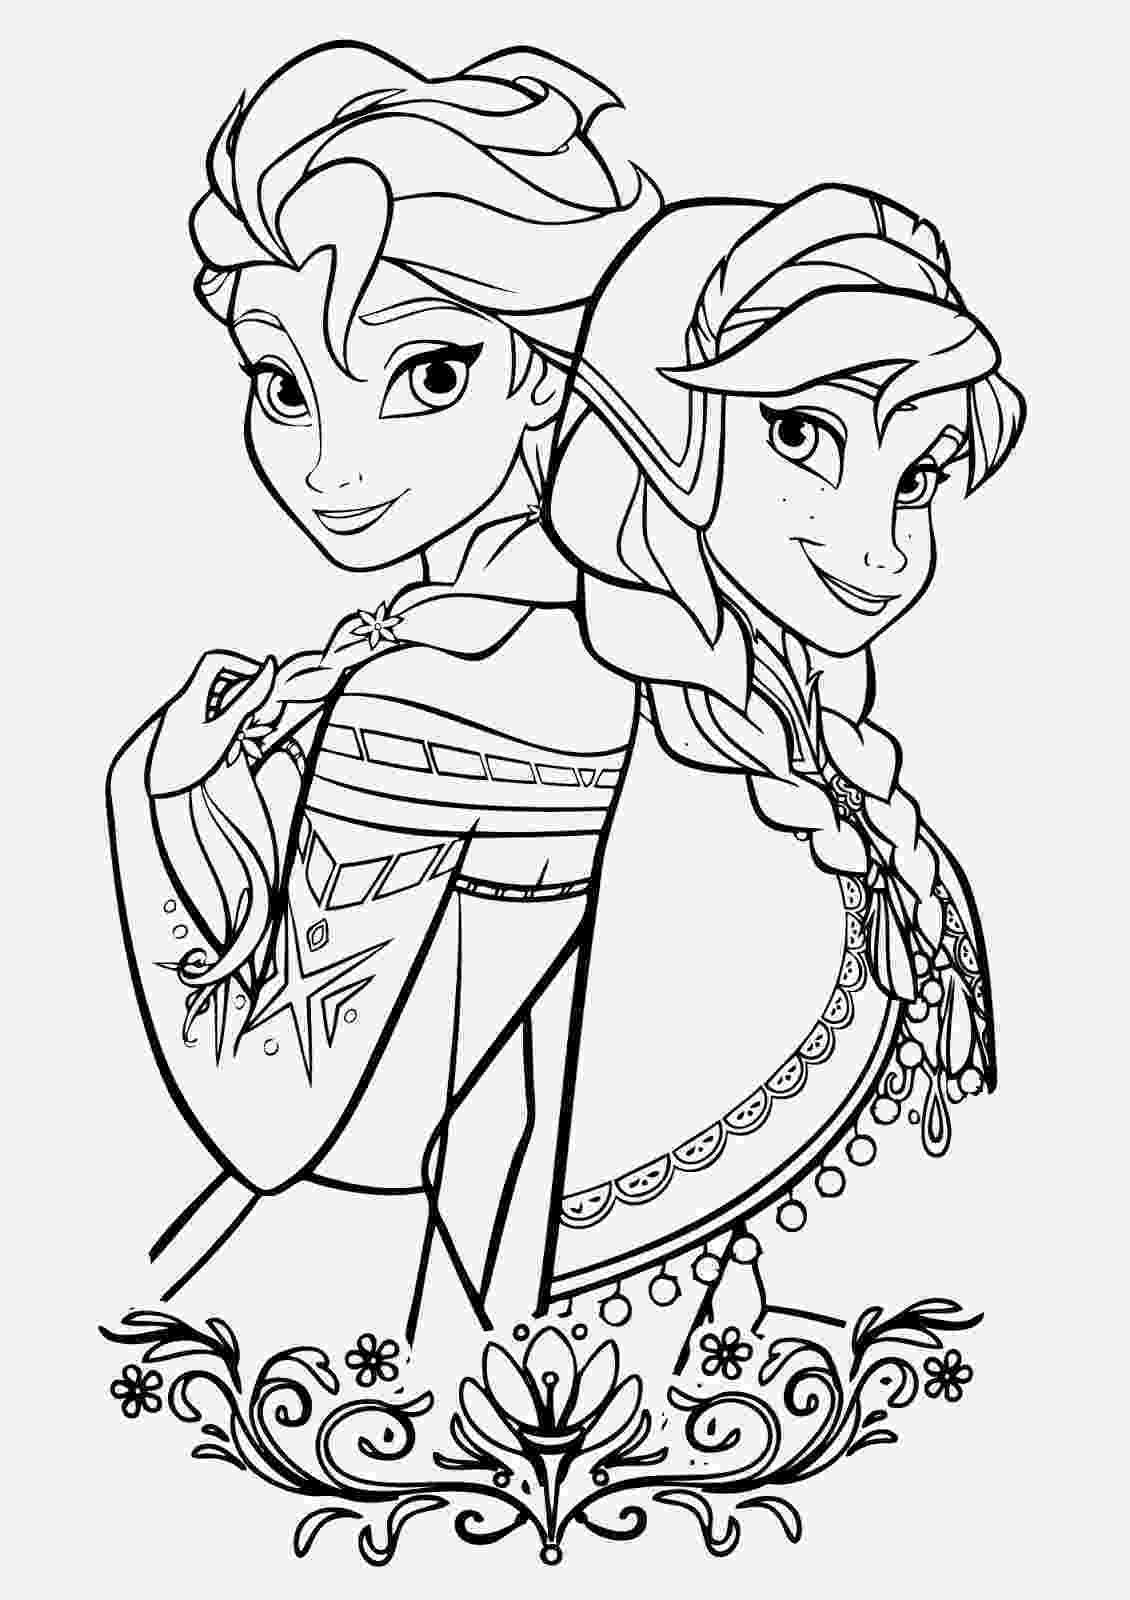 frozen free coloring pages coloring page world frozen portrait frozen pages free coloring 